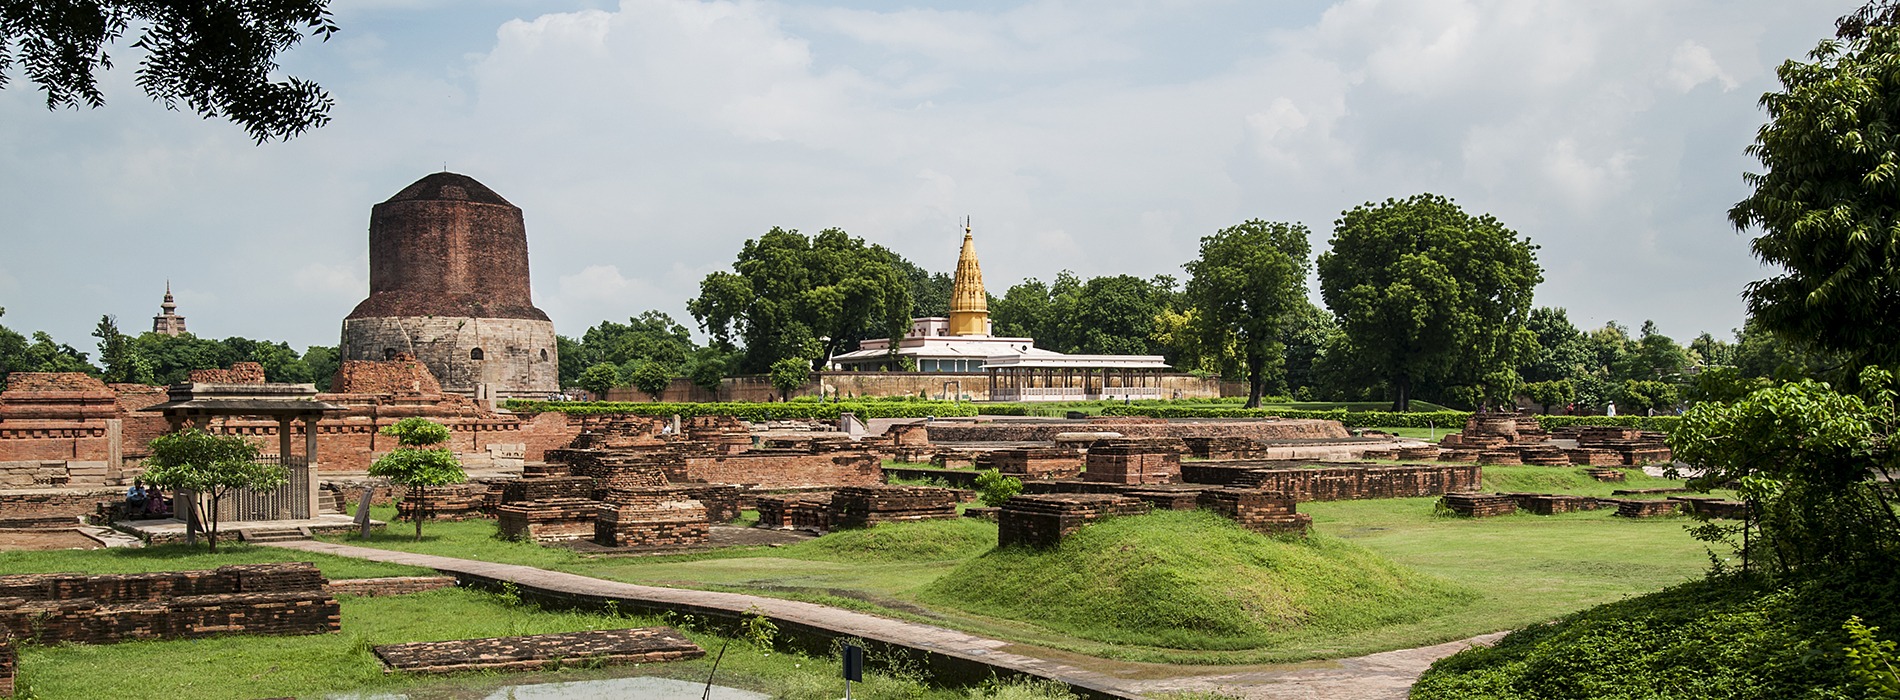 Places to Visit in Sarnath: The Buddhist Circuit